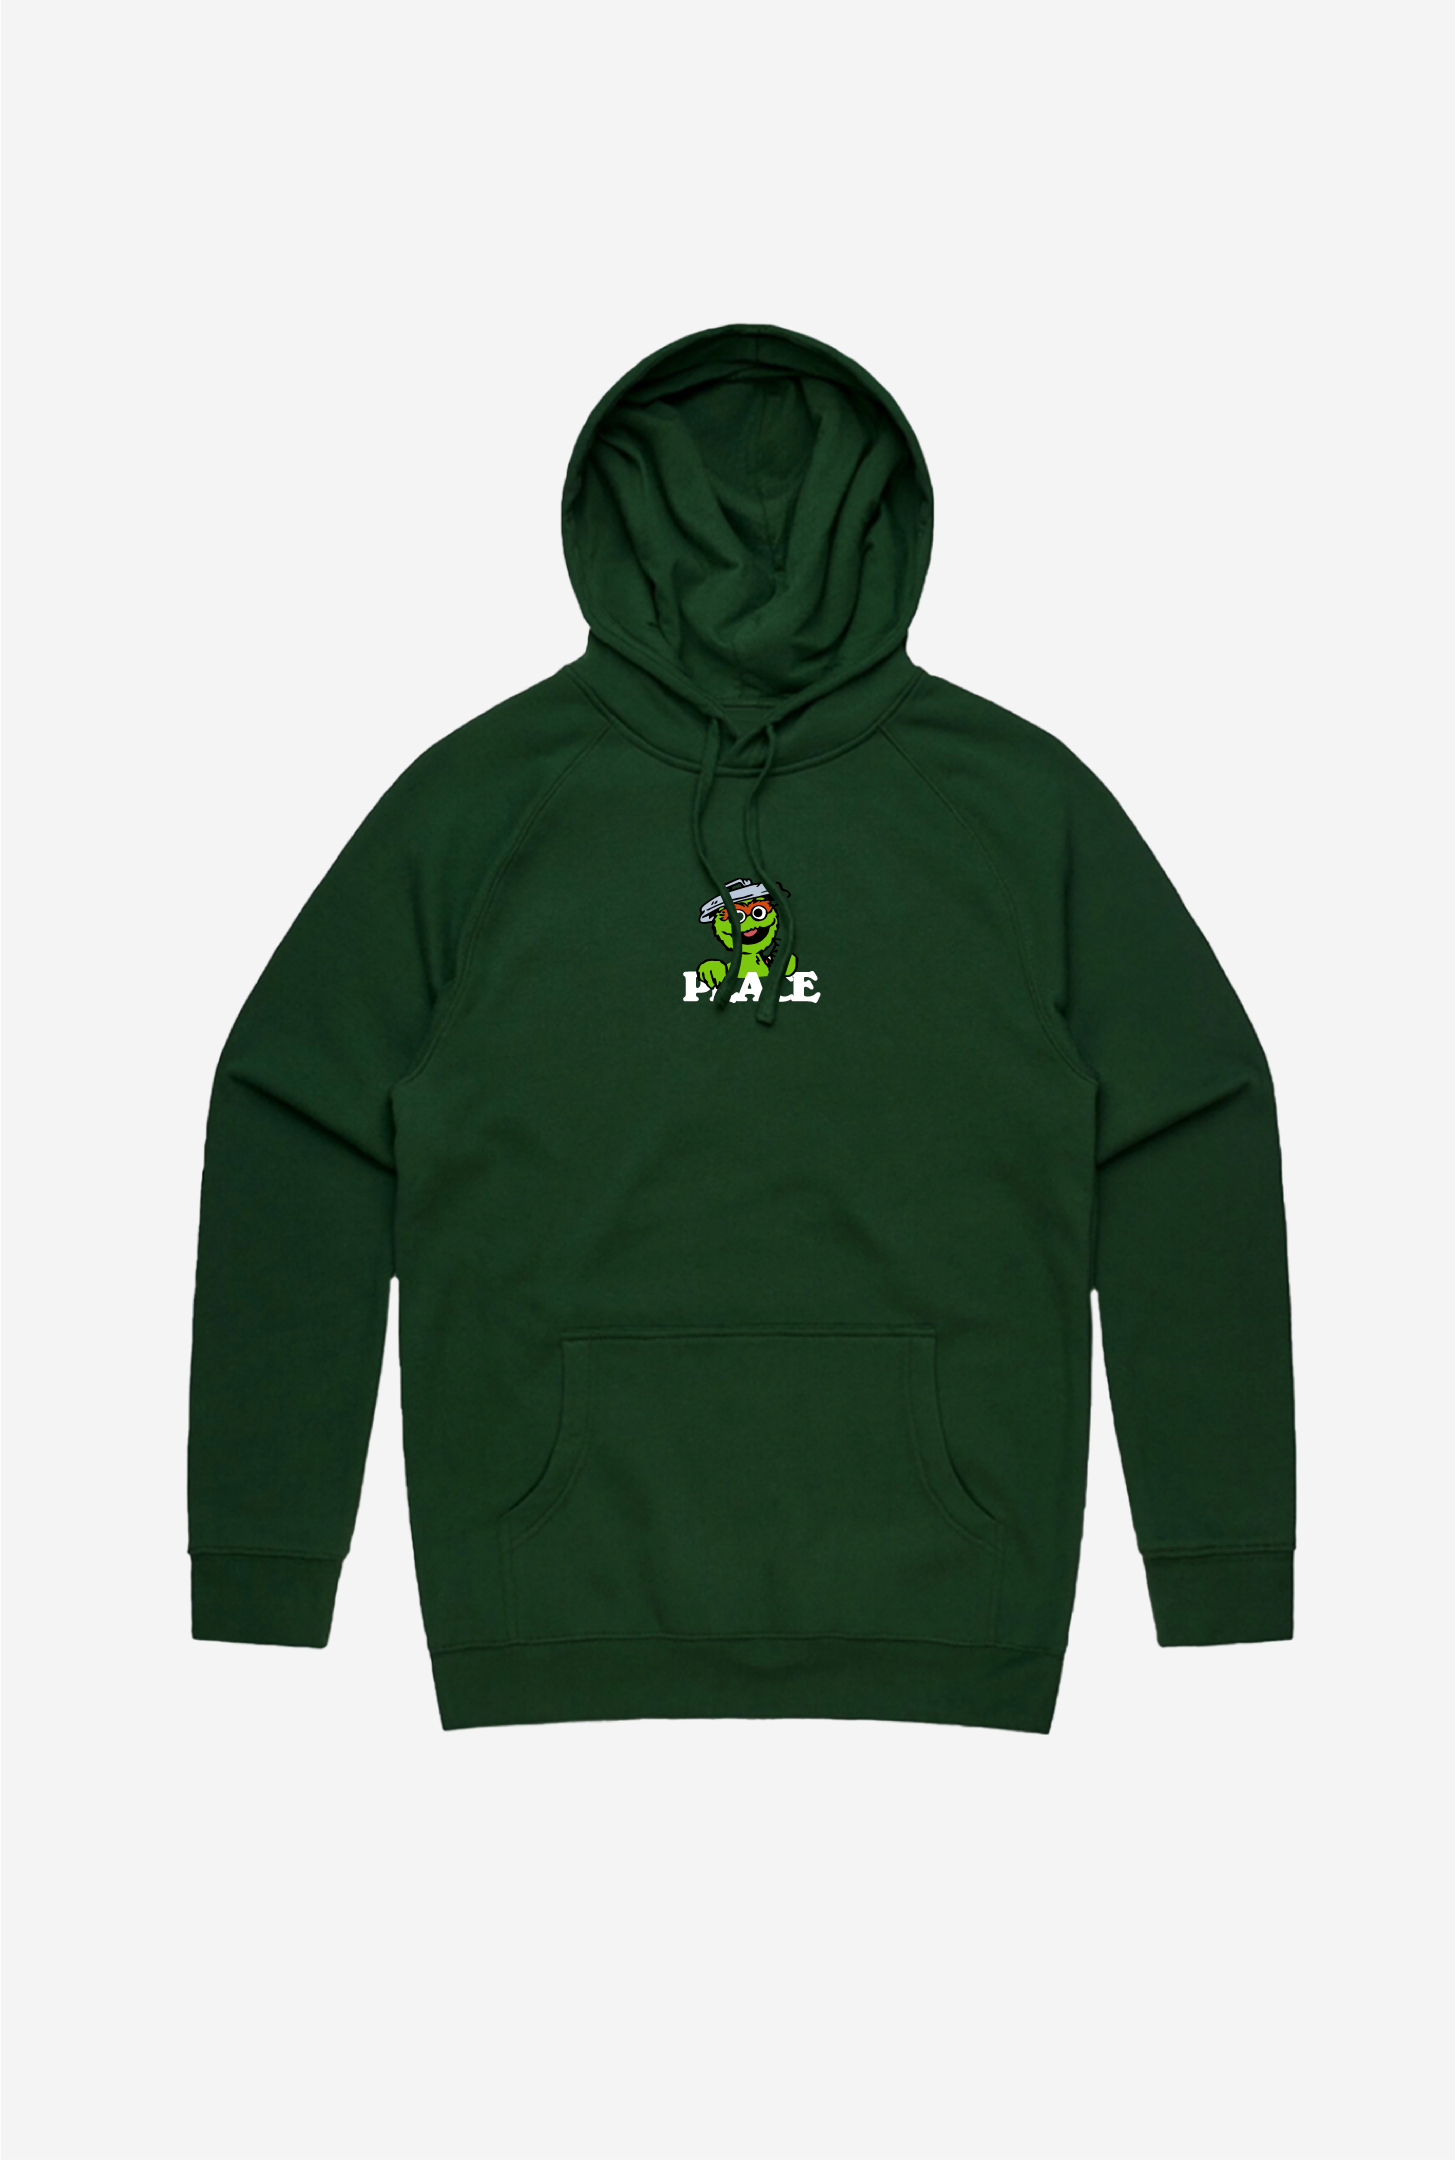 Oscar Peace Hoodie - Forest Green